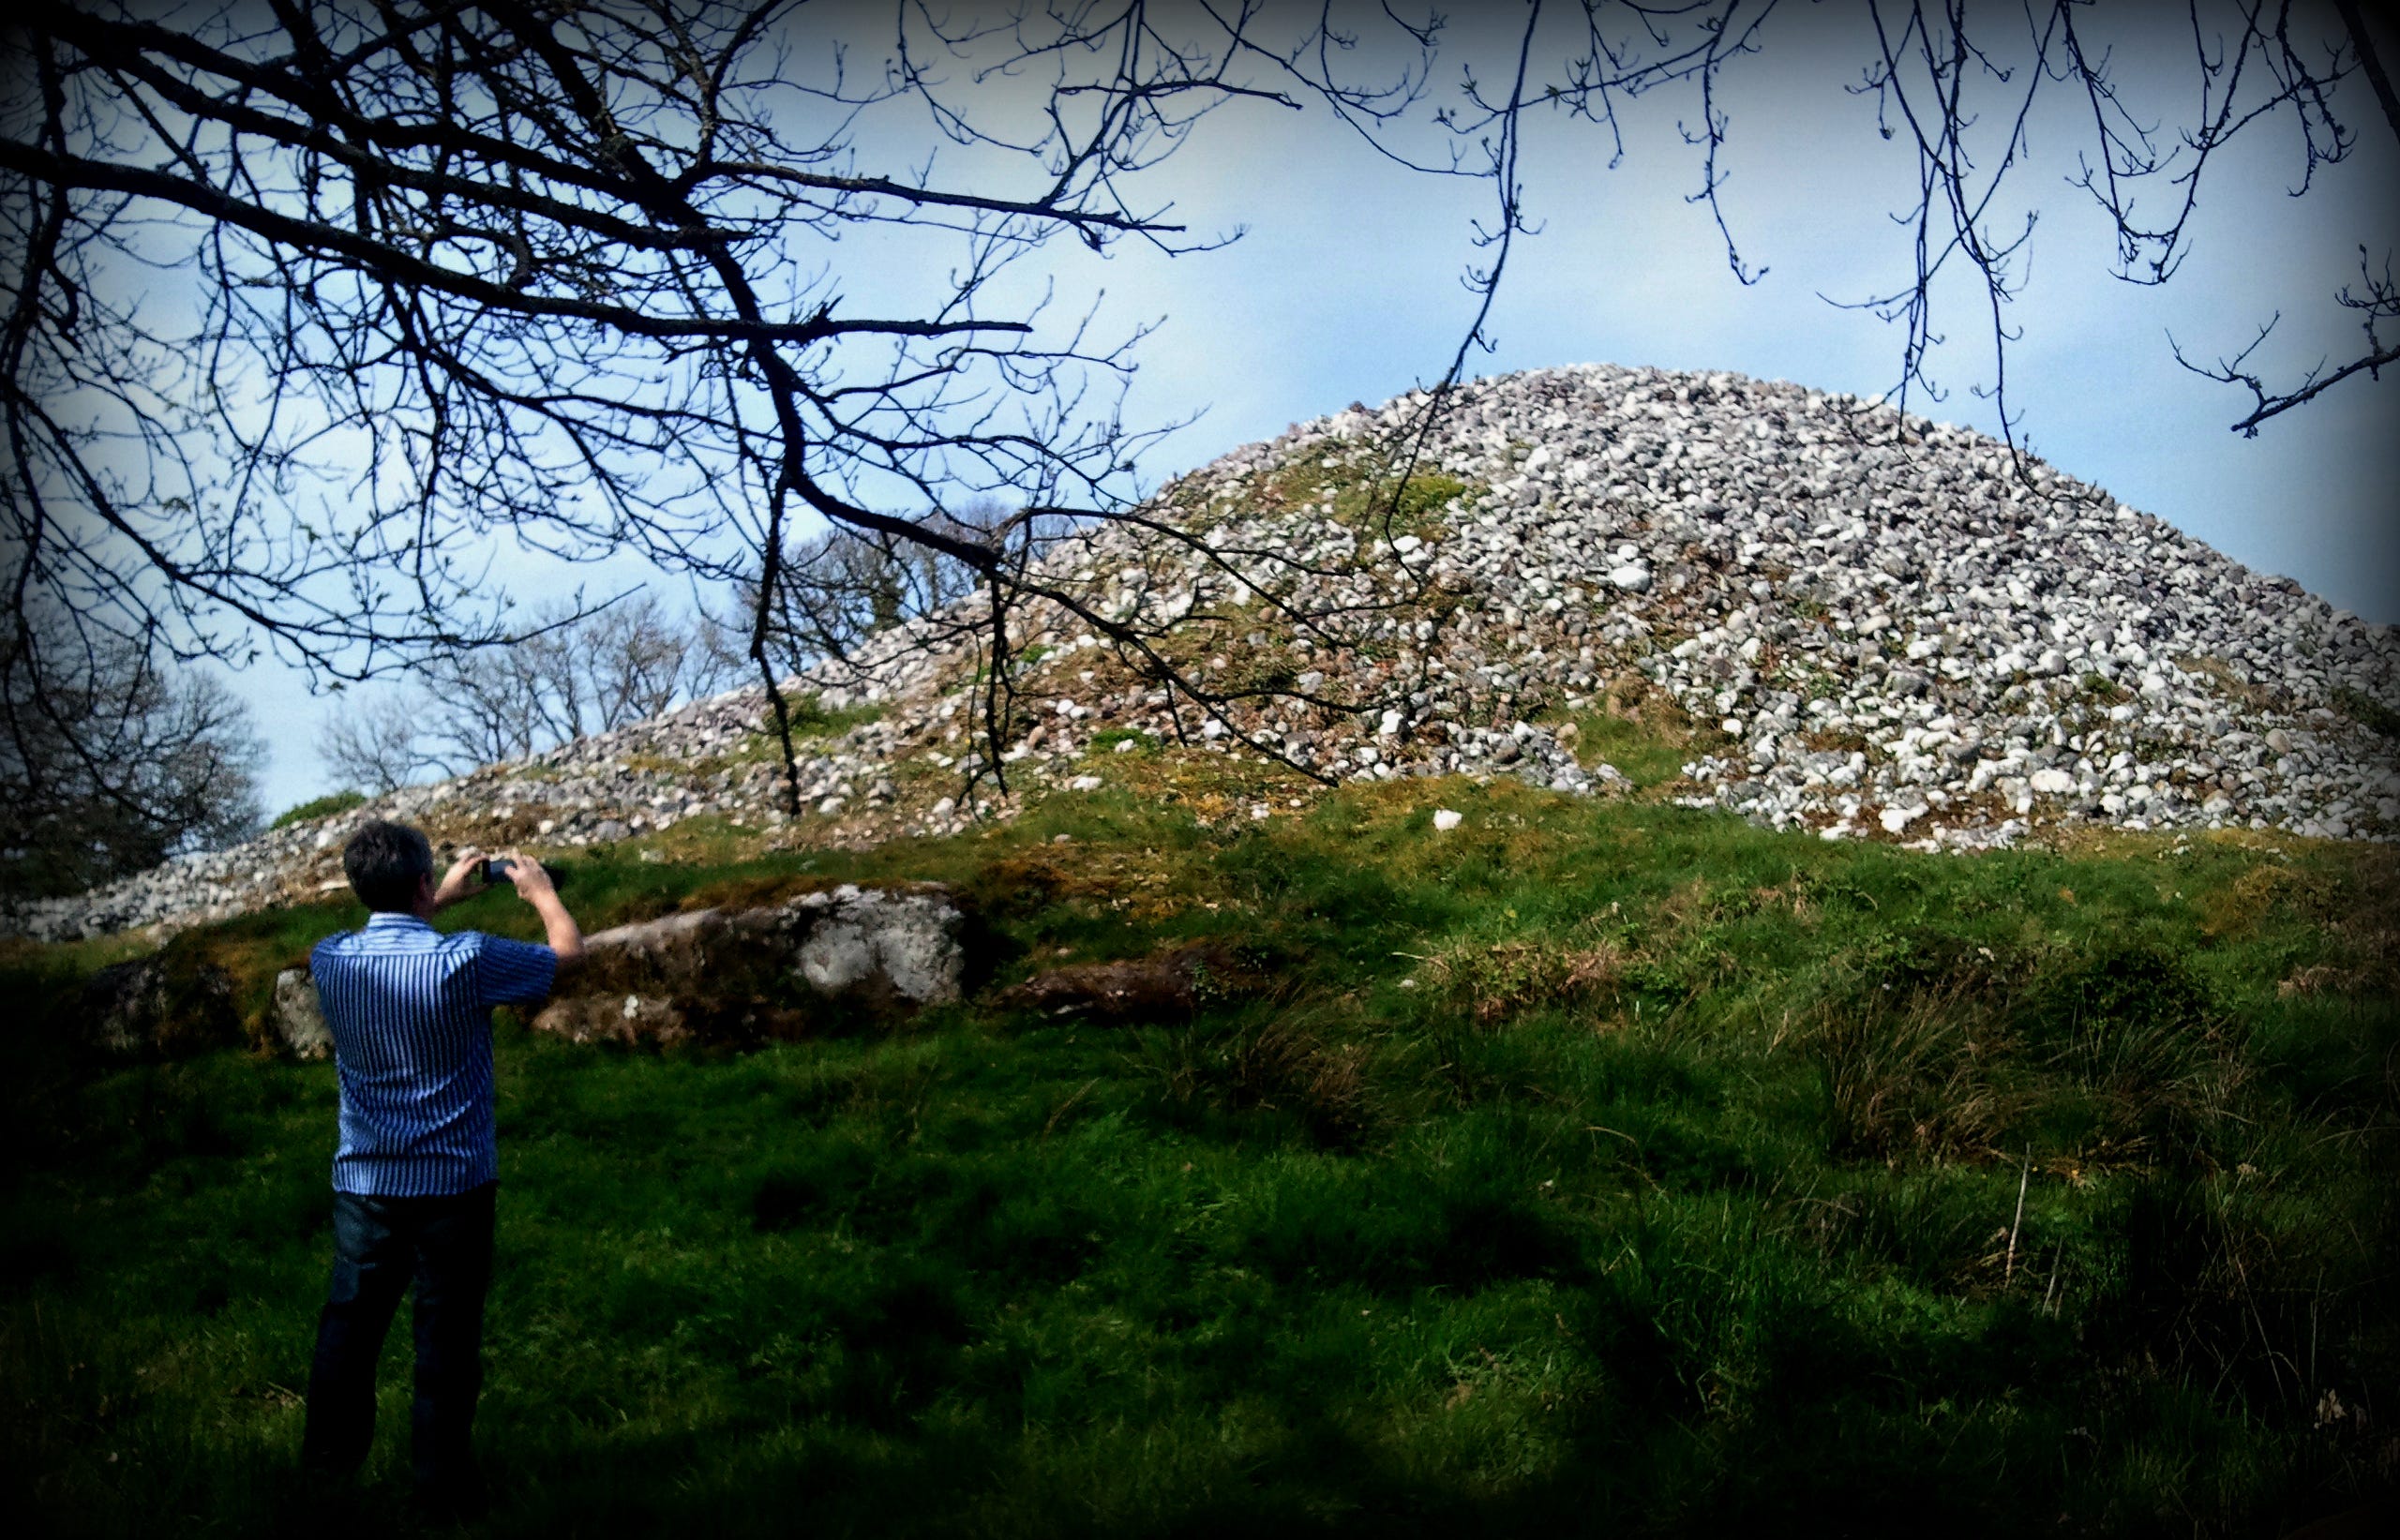 Large cairn covered in small white stones like scree, some large kerb stones visible at the bottom, set against a blue sky, with man dressed in jeans in the foreground beneath a bare-branched tree, taking a photo of the cairn.